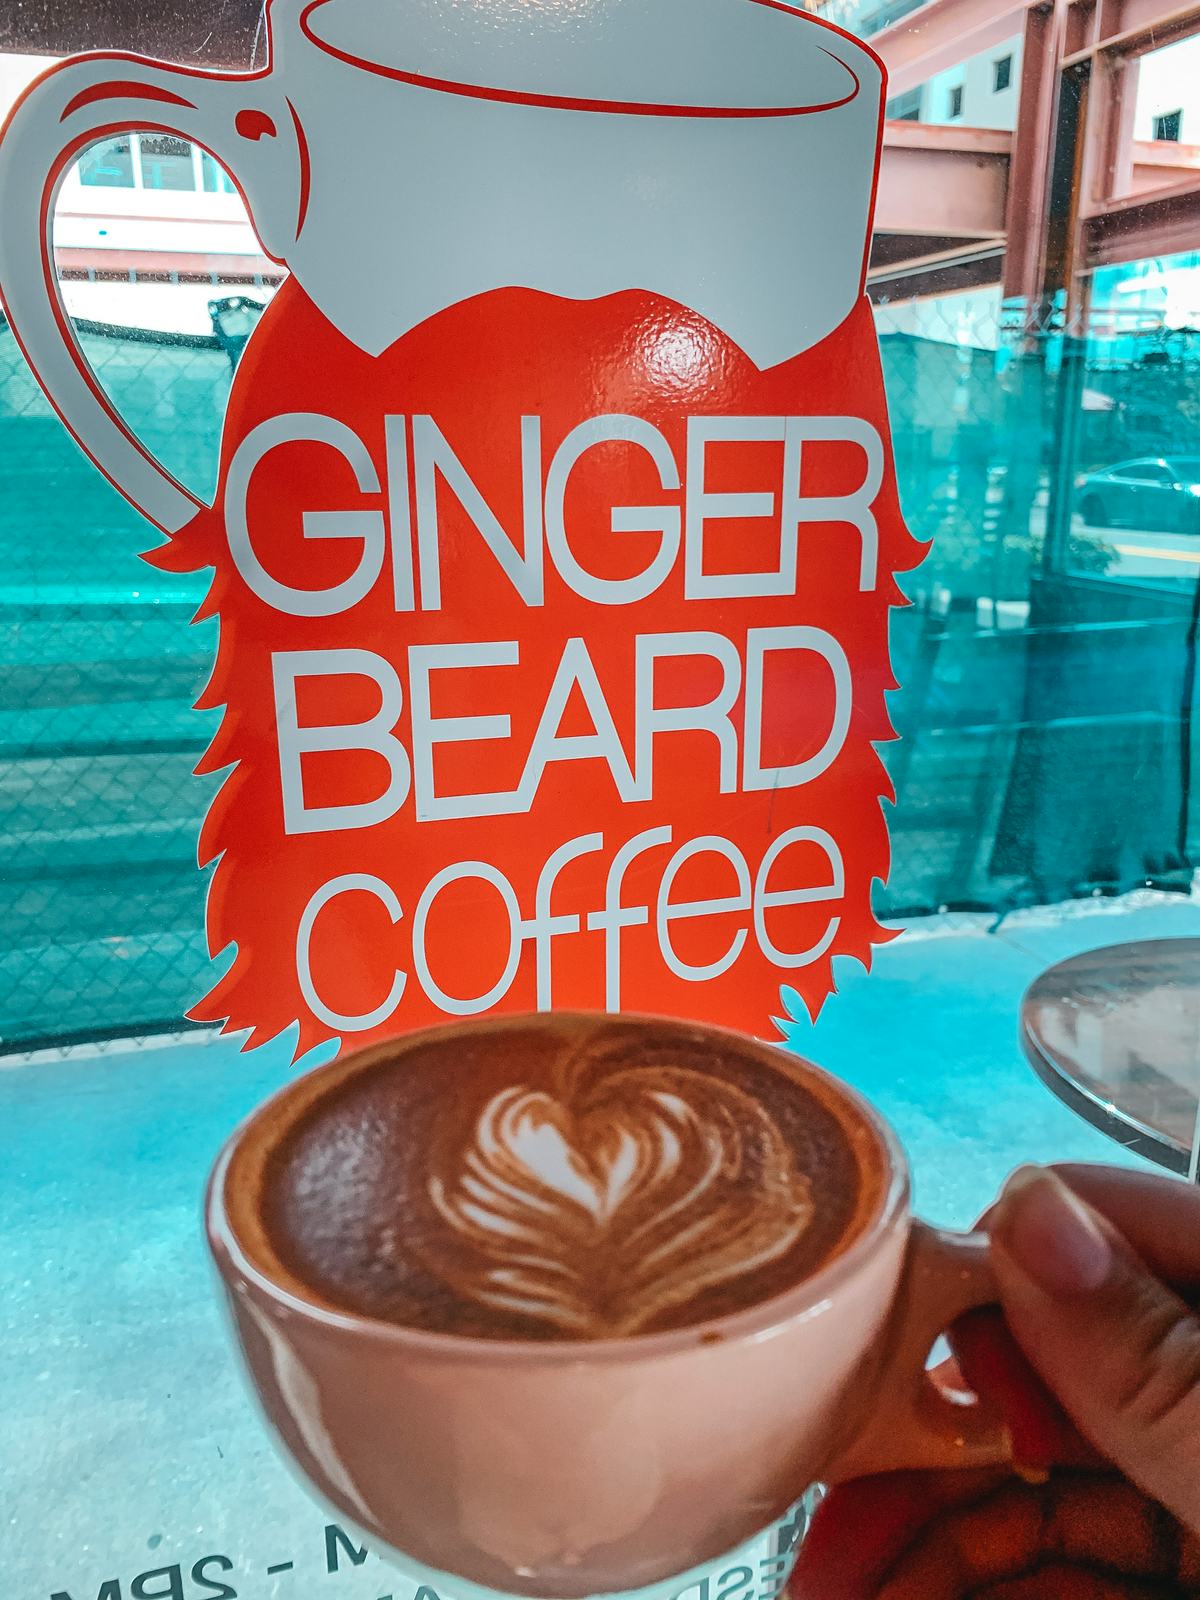 Cappuccino from Ginger Beard Coffee in Tampa